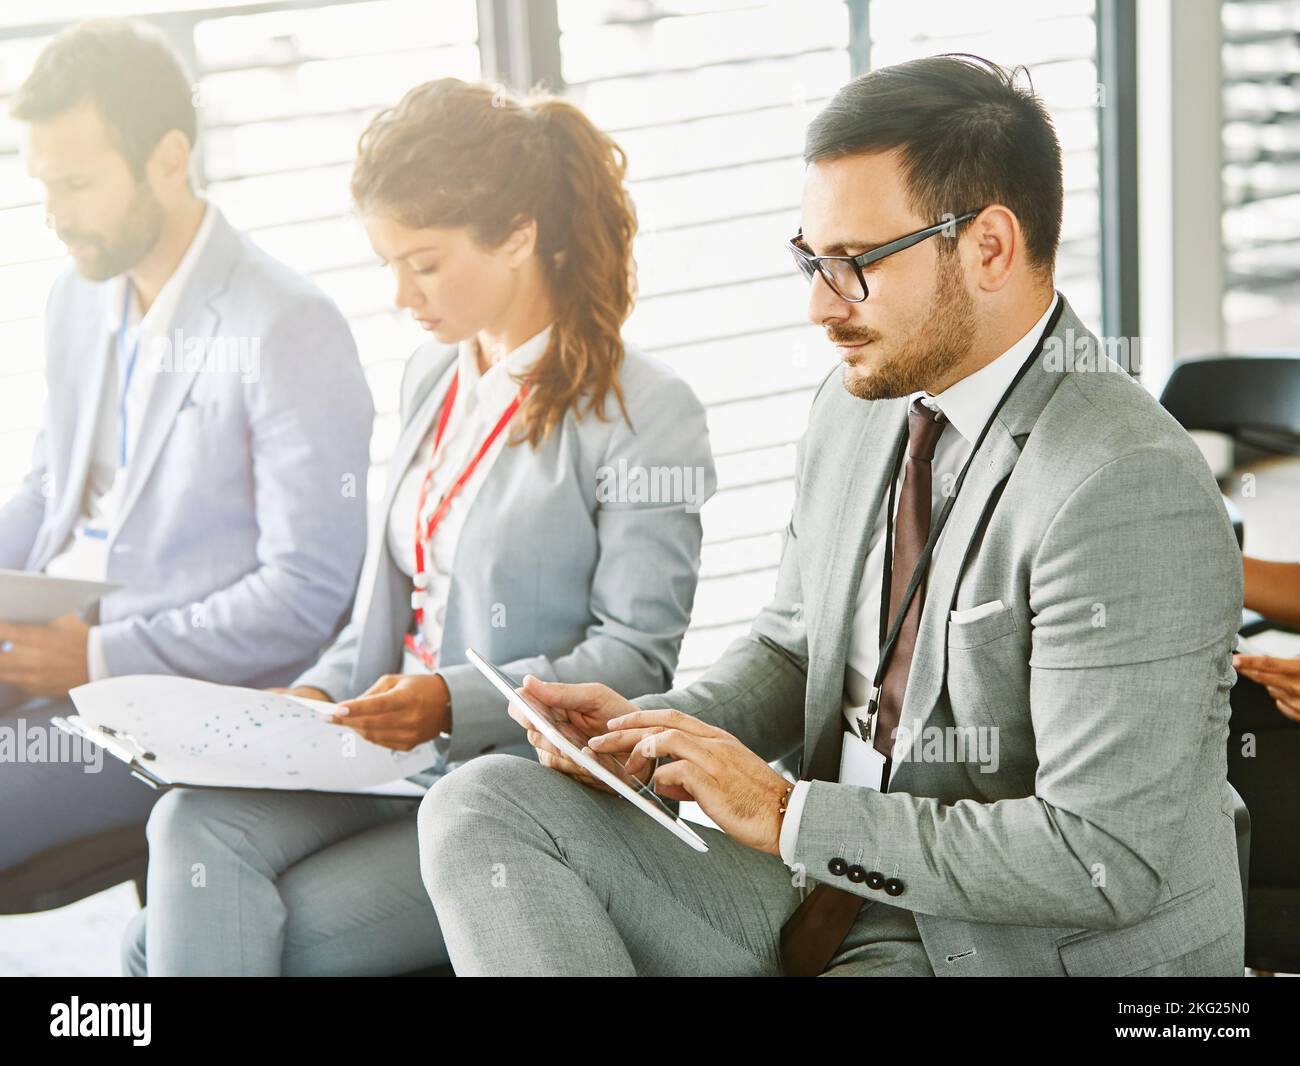 business meeting conference presentation businessman office seminar corporate team businesswoman tablet Stock Photo